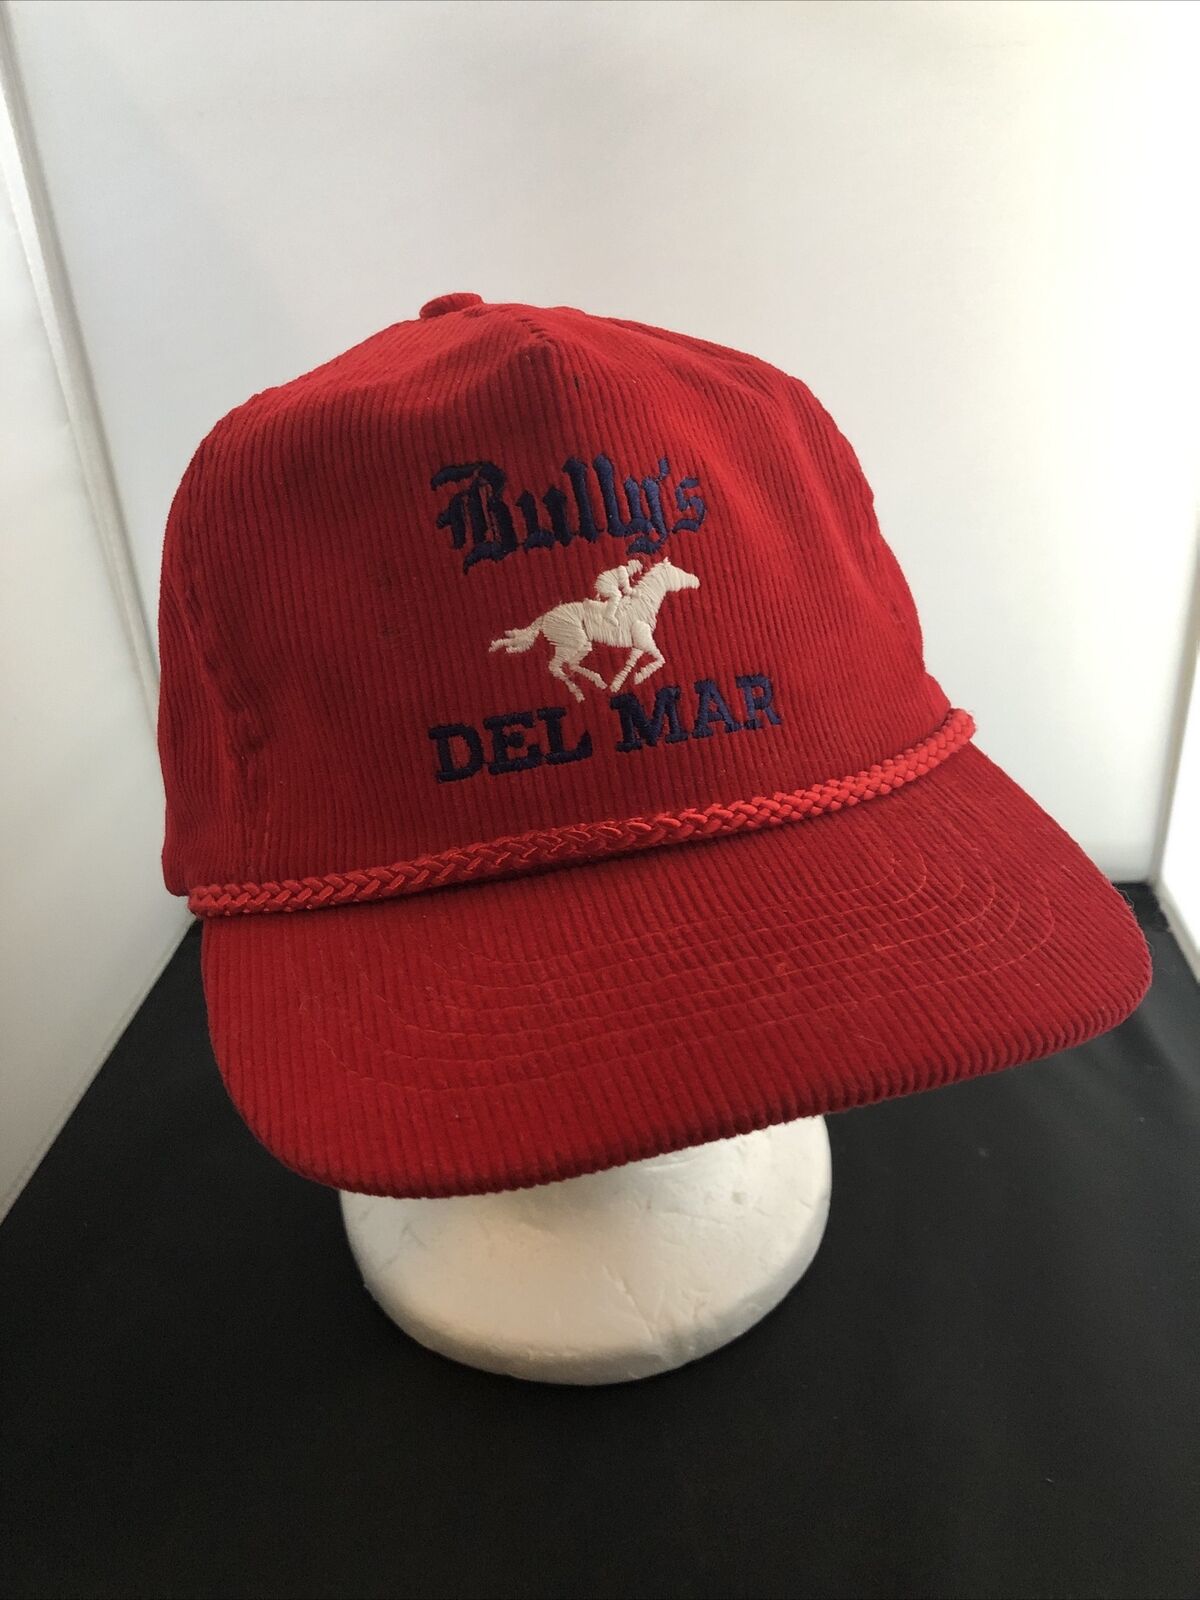 Rare Bully’s DEL MAR Hat Vintage Red Corduroy Steakhouse